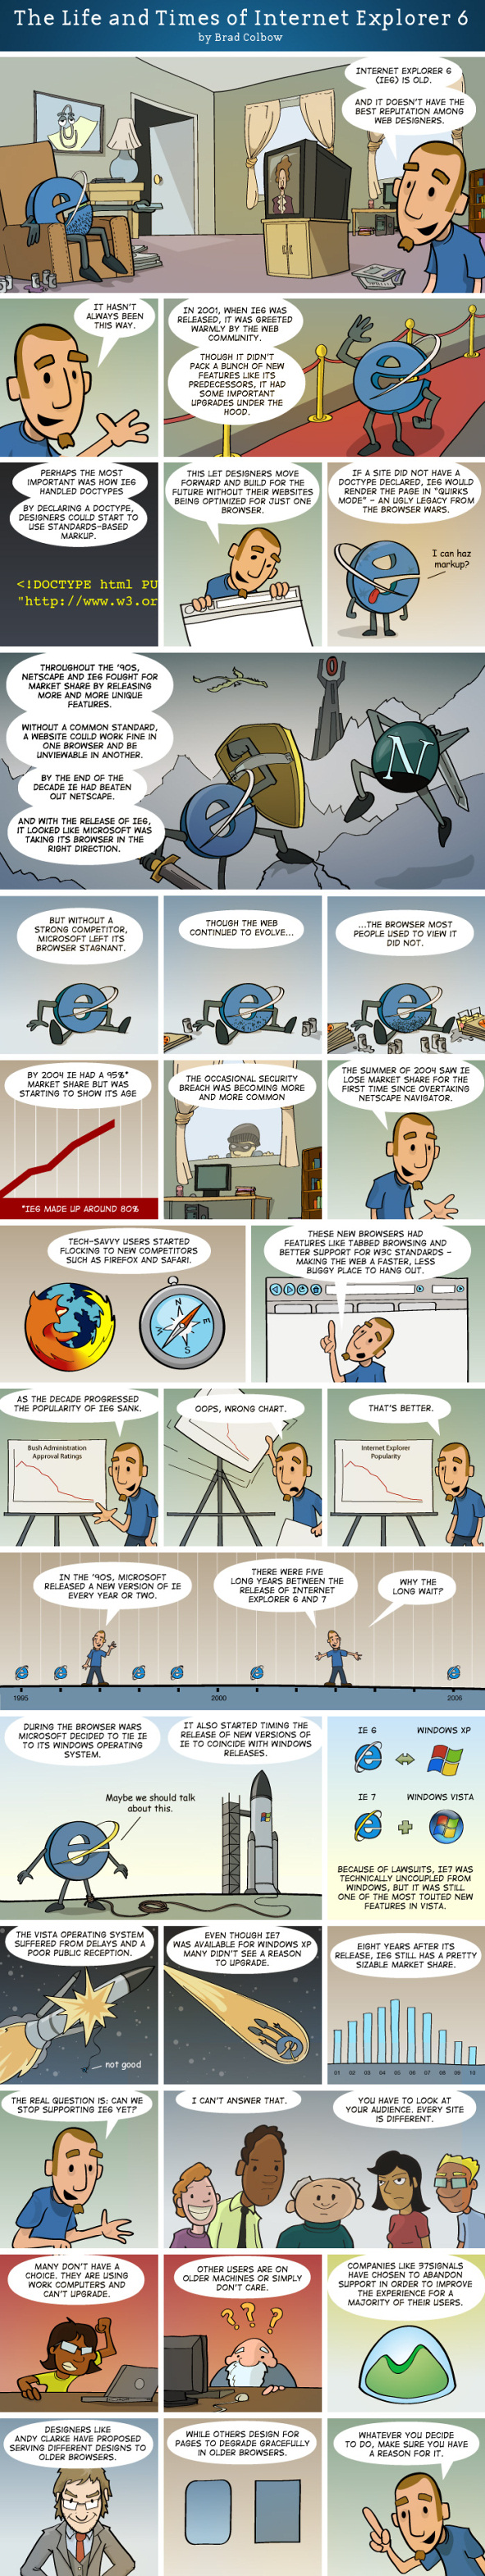 The Life and Times of Internet Explorer 6 (Comic)